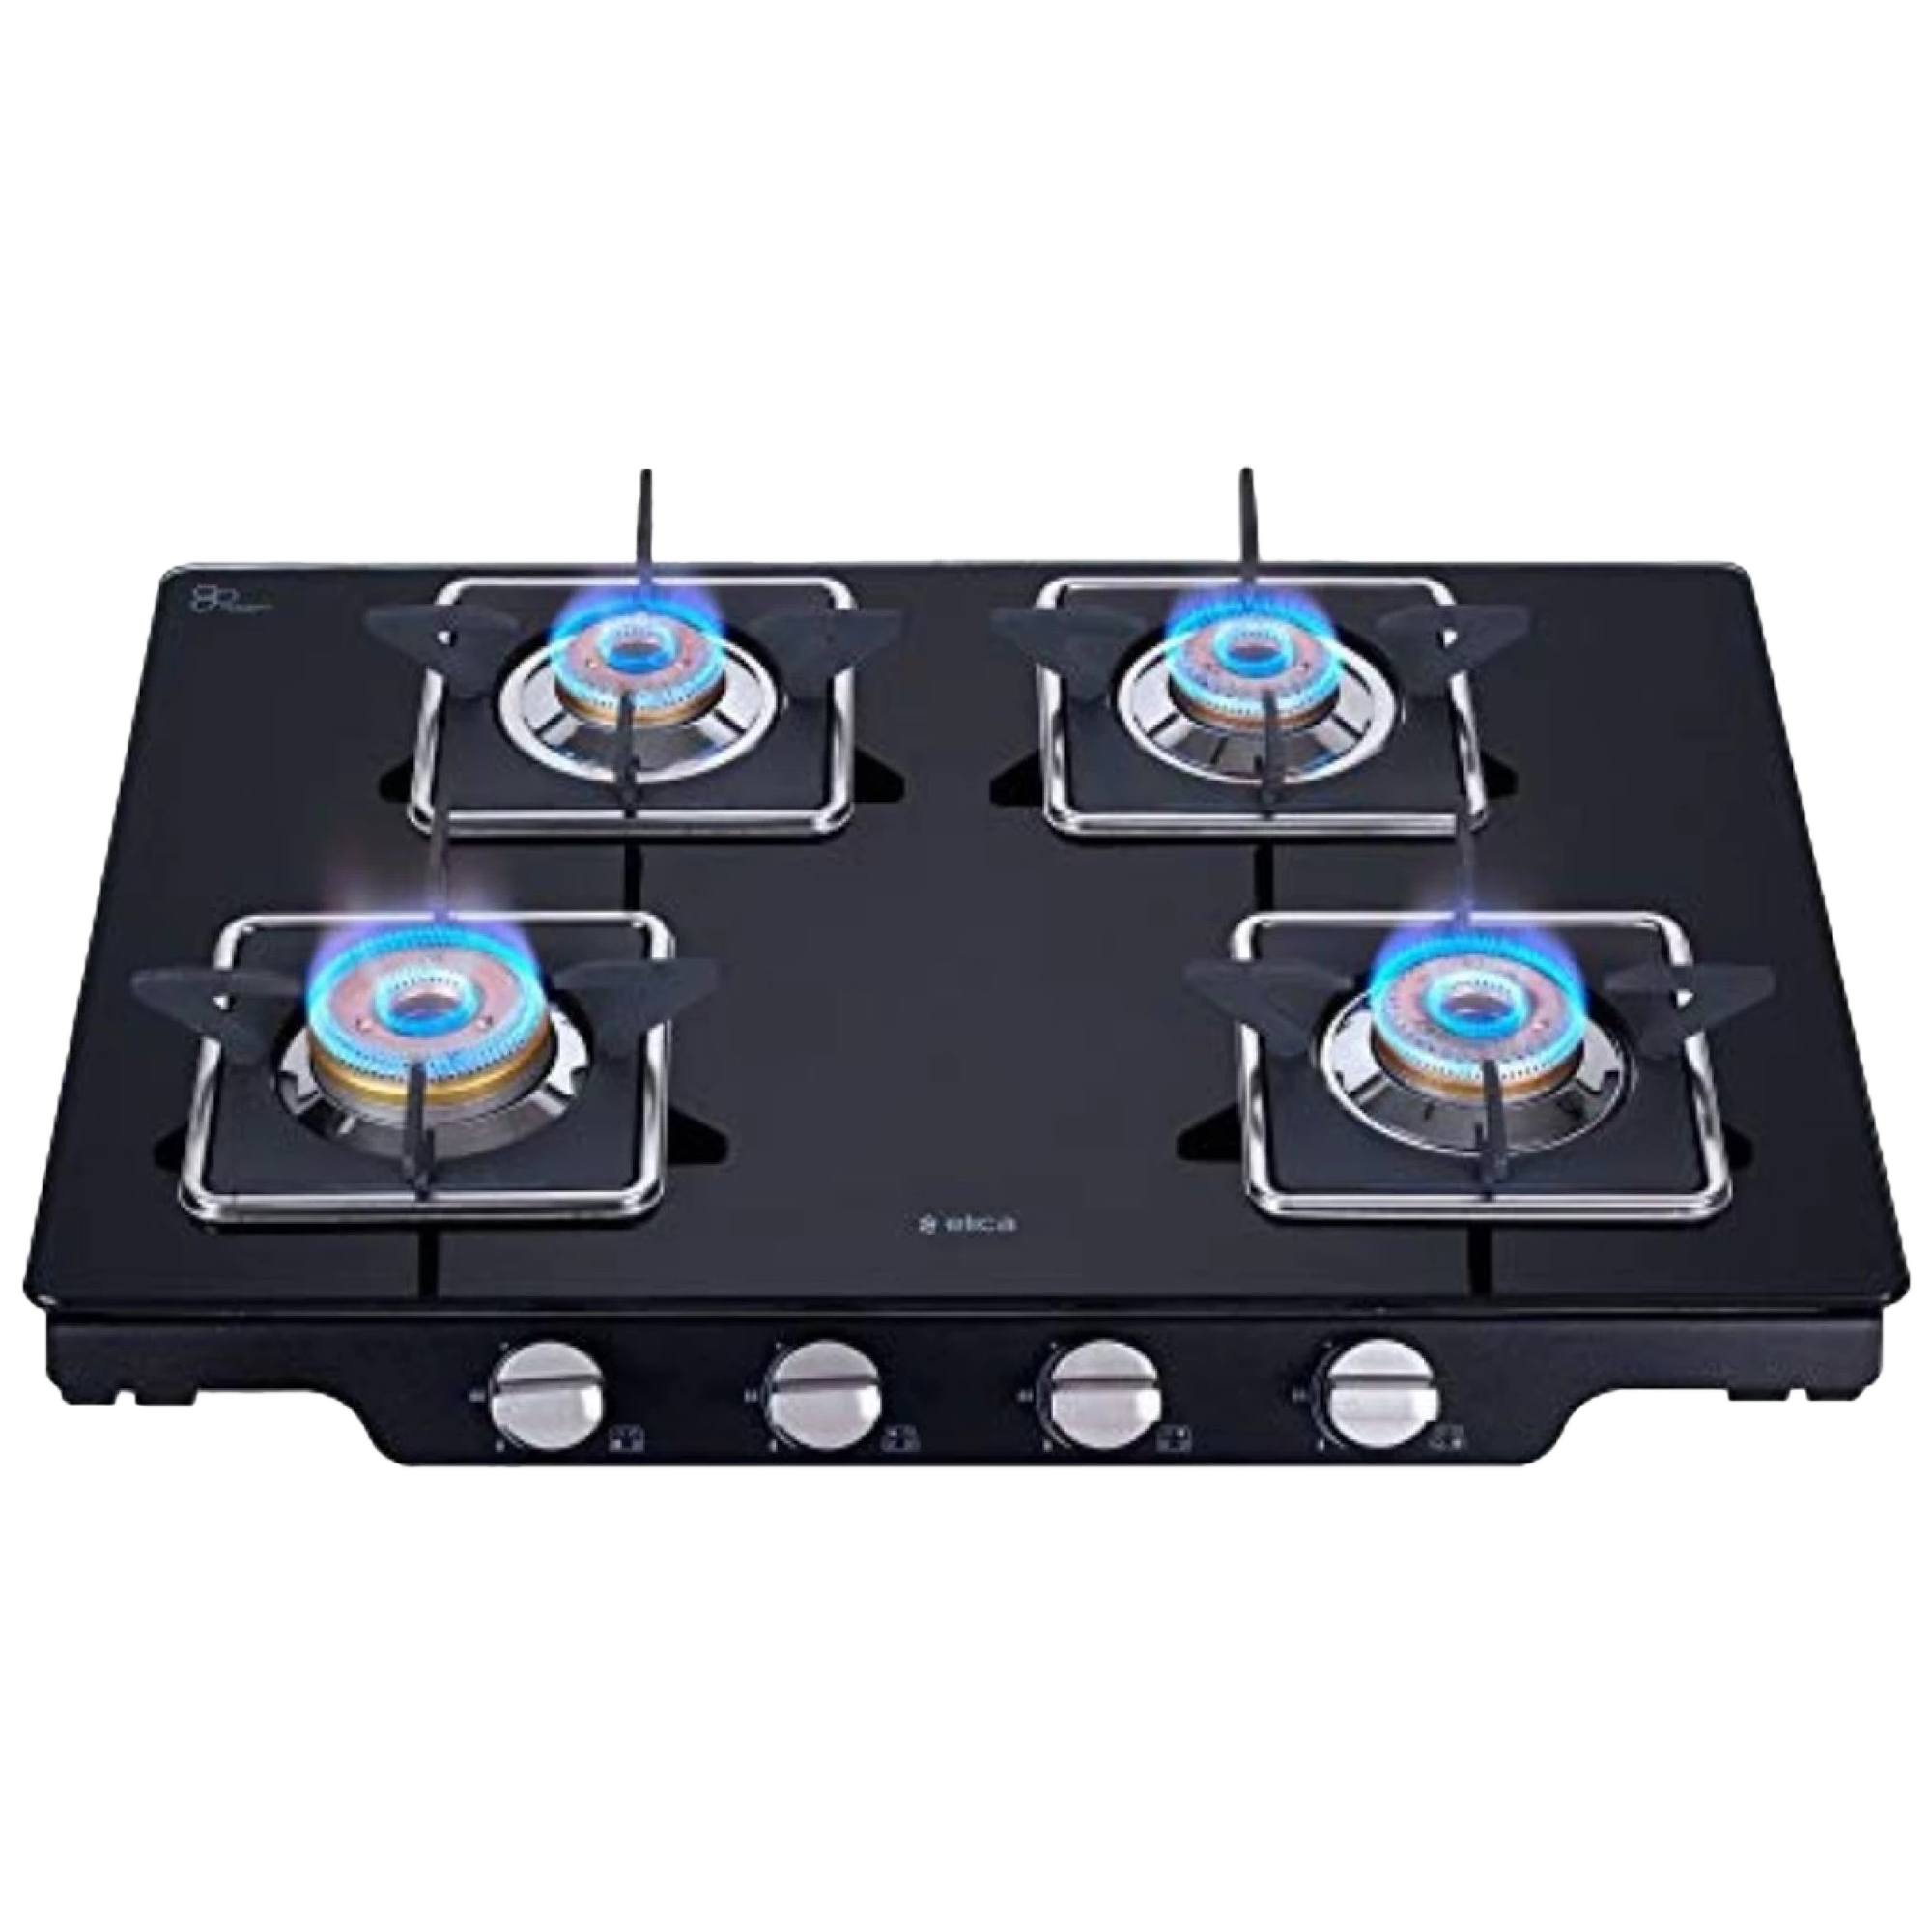 Elica Patio 469 SPF Series 4 Burner Cooktop (Square Enameled Grid Supports, Black)_1